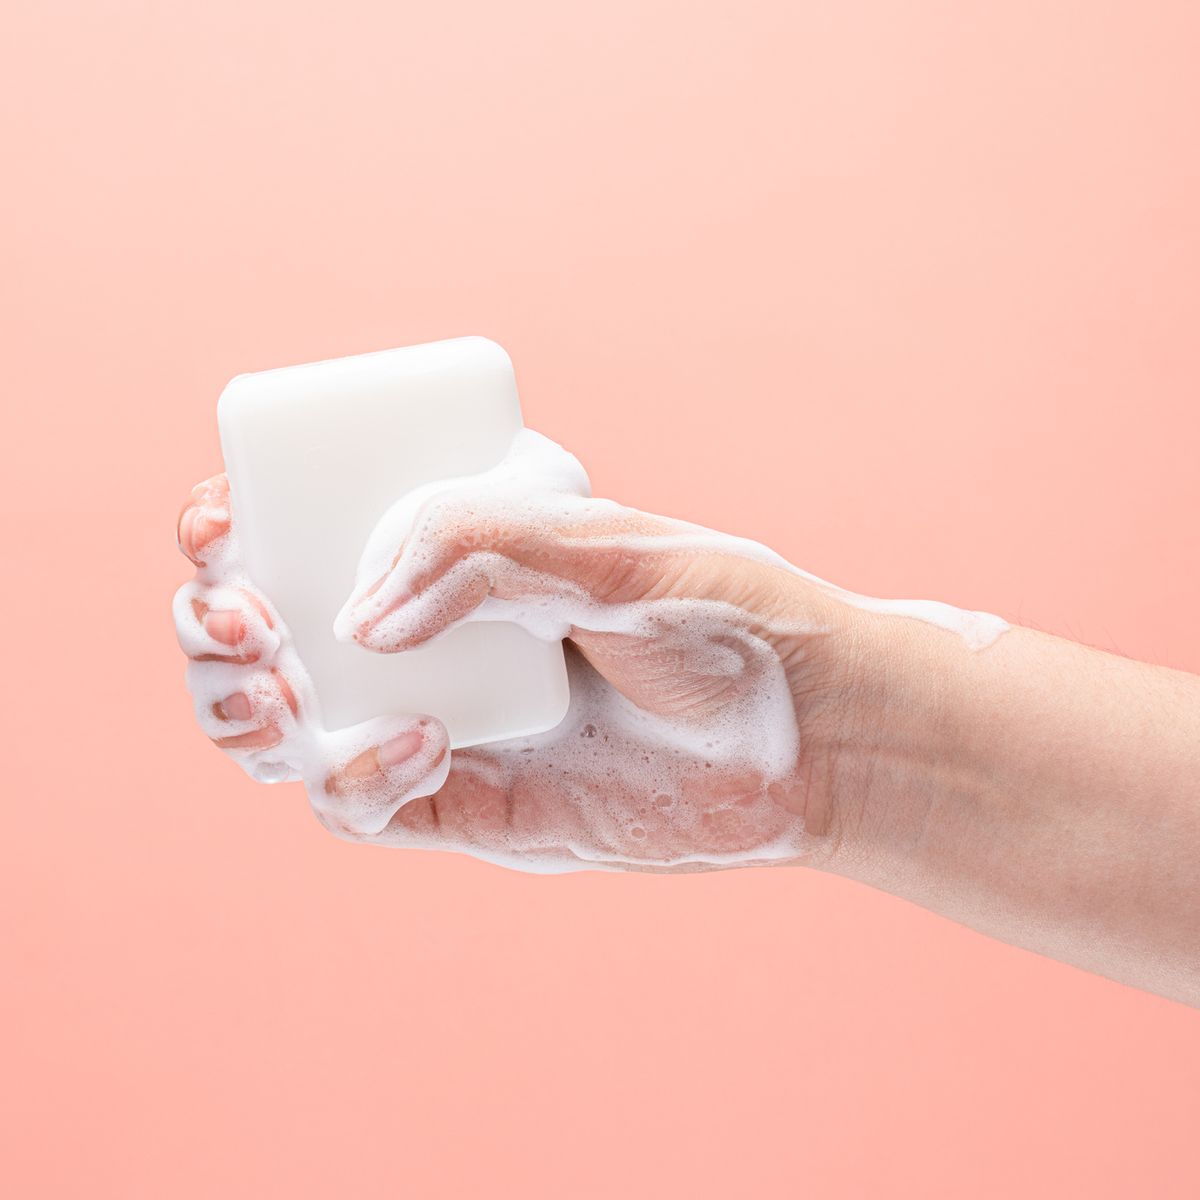 hand gripping a white soap